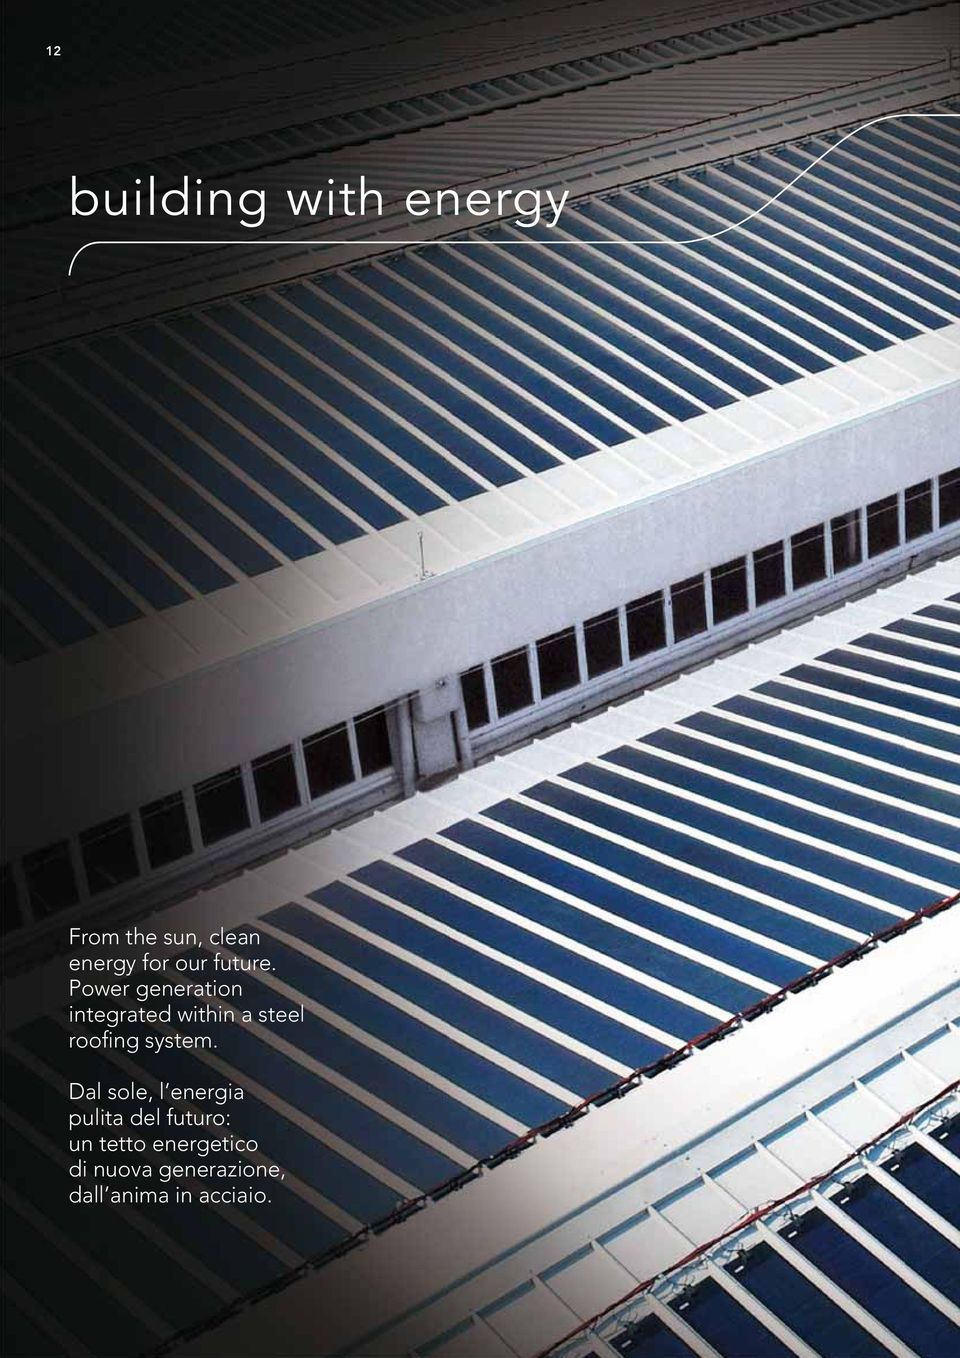 Power generation integrated within a steel roofing system.